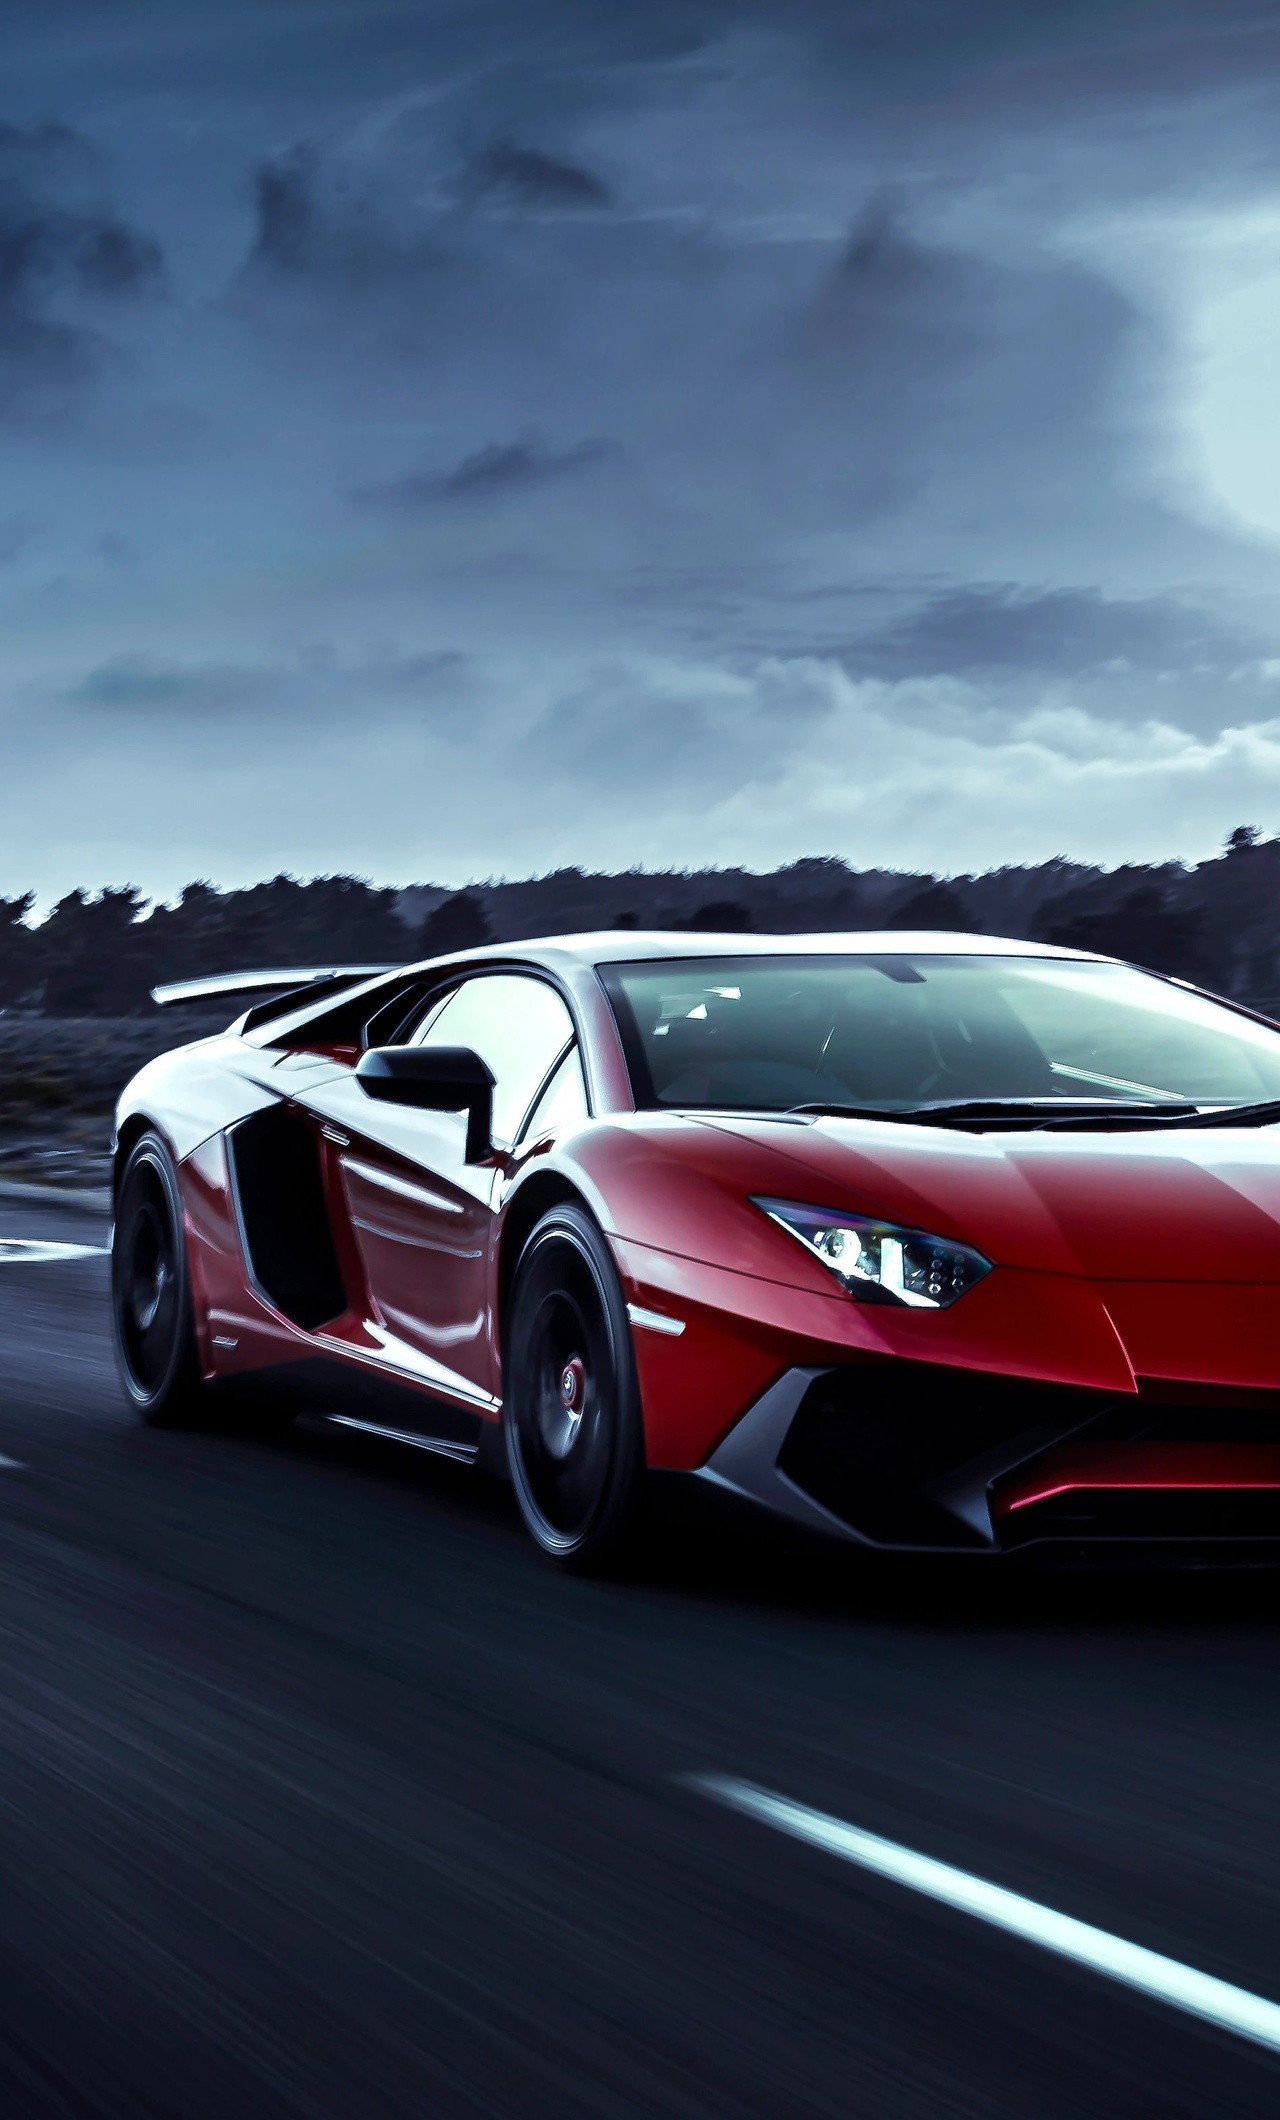 1280x21 Red Lamborghini Aventador Moon Night Iphone 6 Hd 4k Wallpapers Images Backgrounds Photos And Pictures